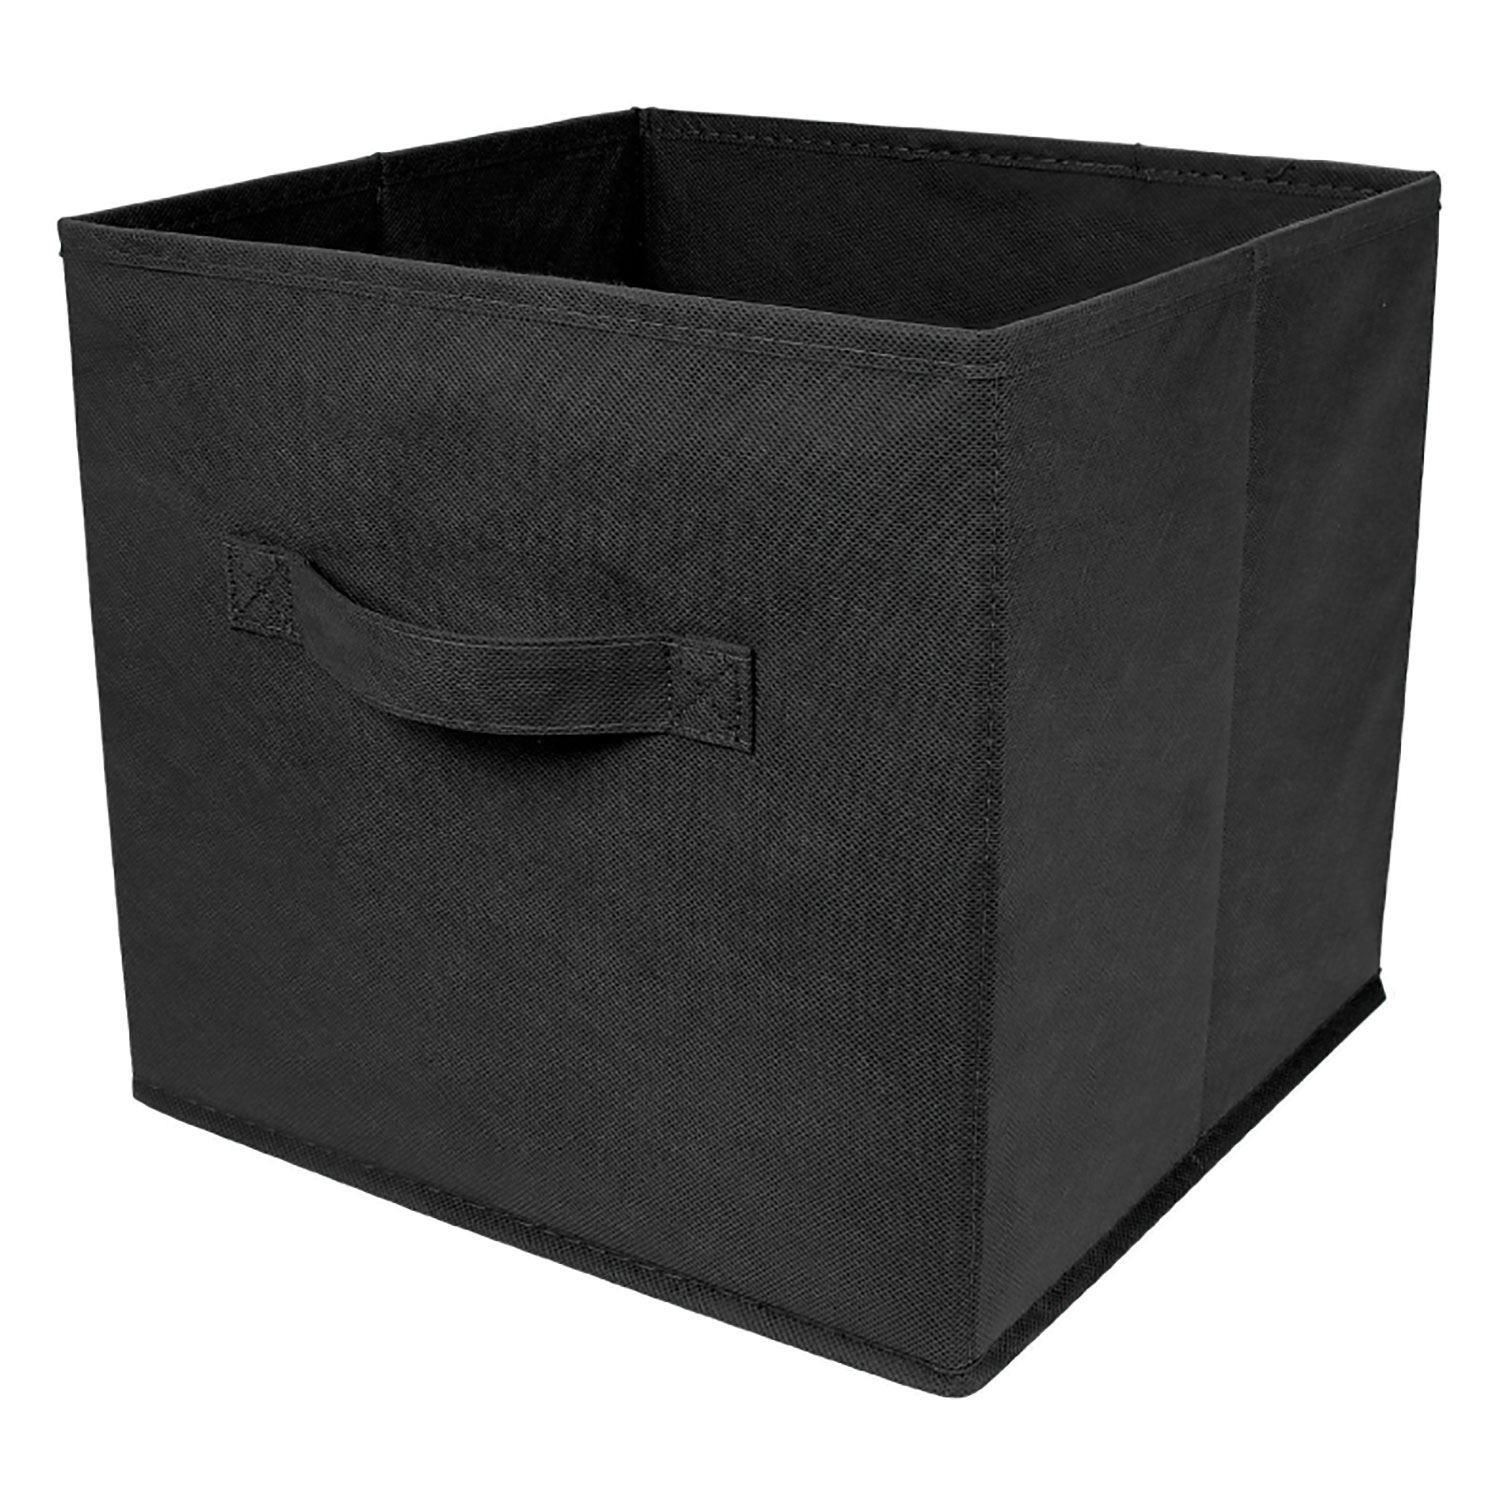 Collapsible Box DIY
 6 x Foldable Square Canvas Storage Box Collapsible